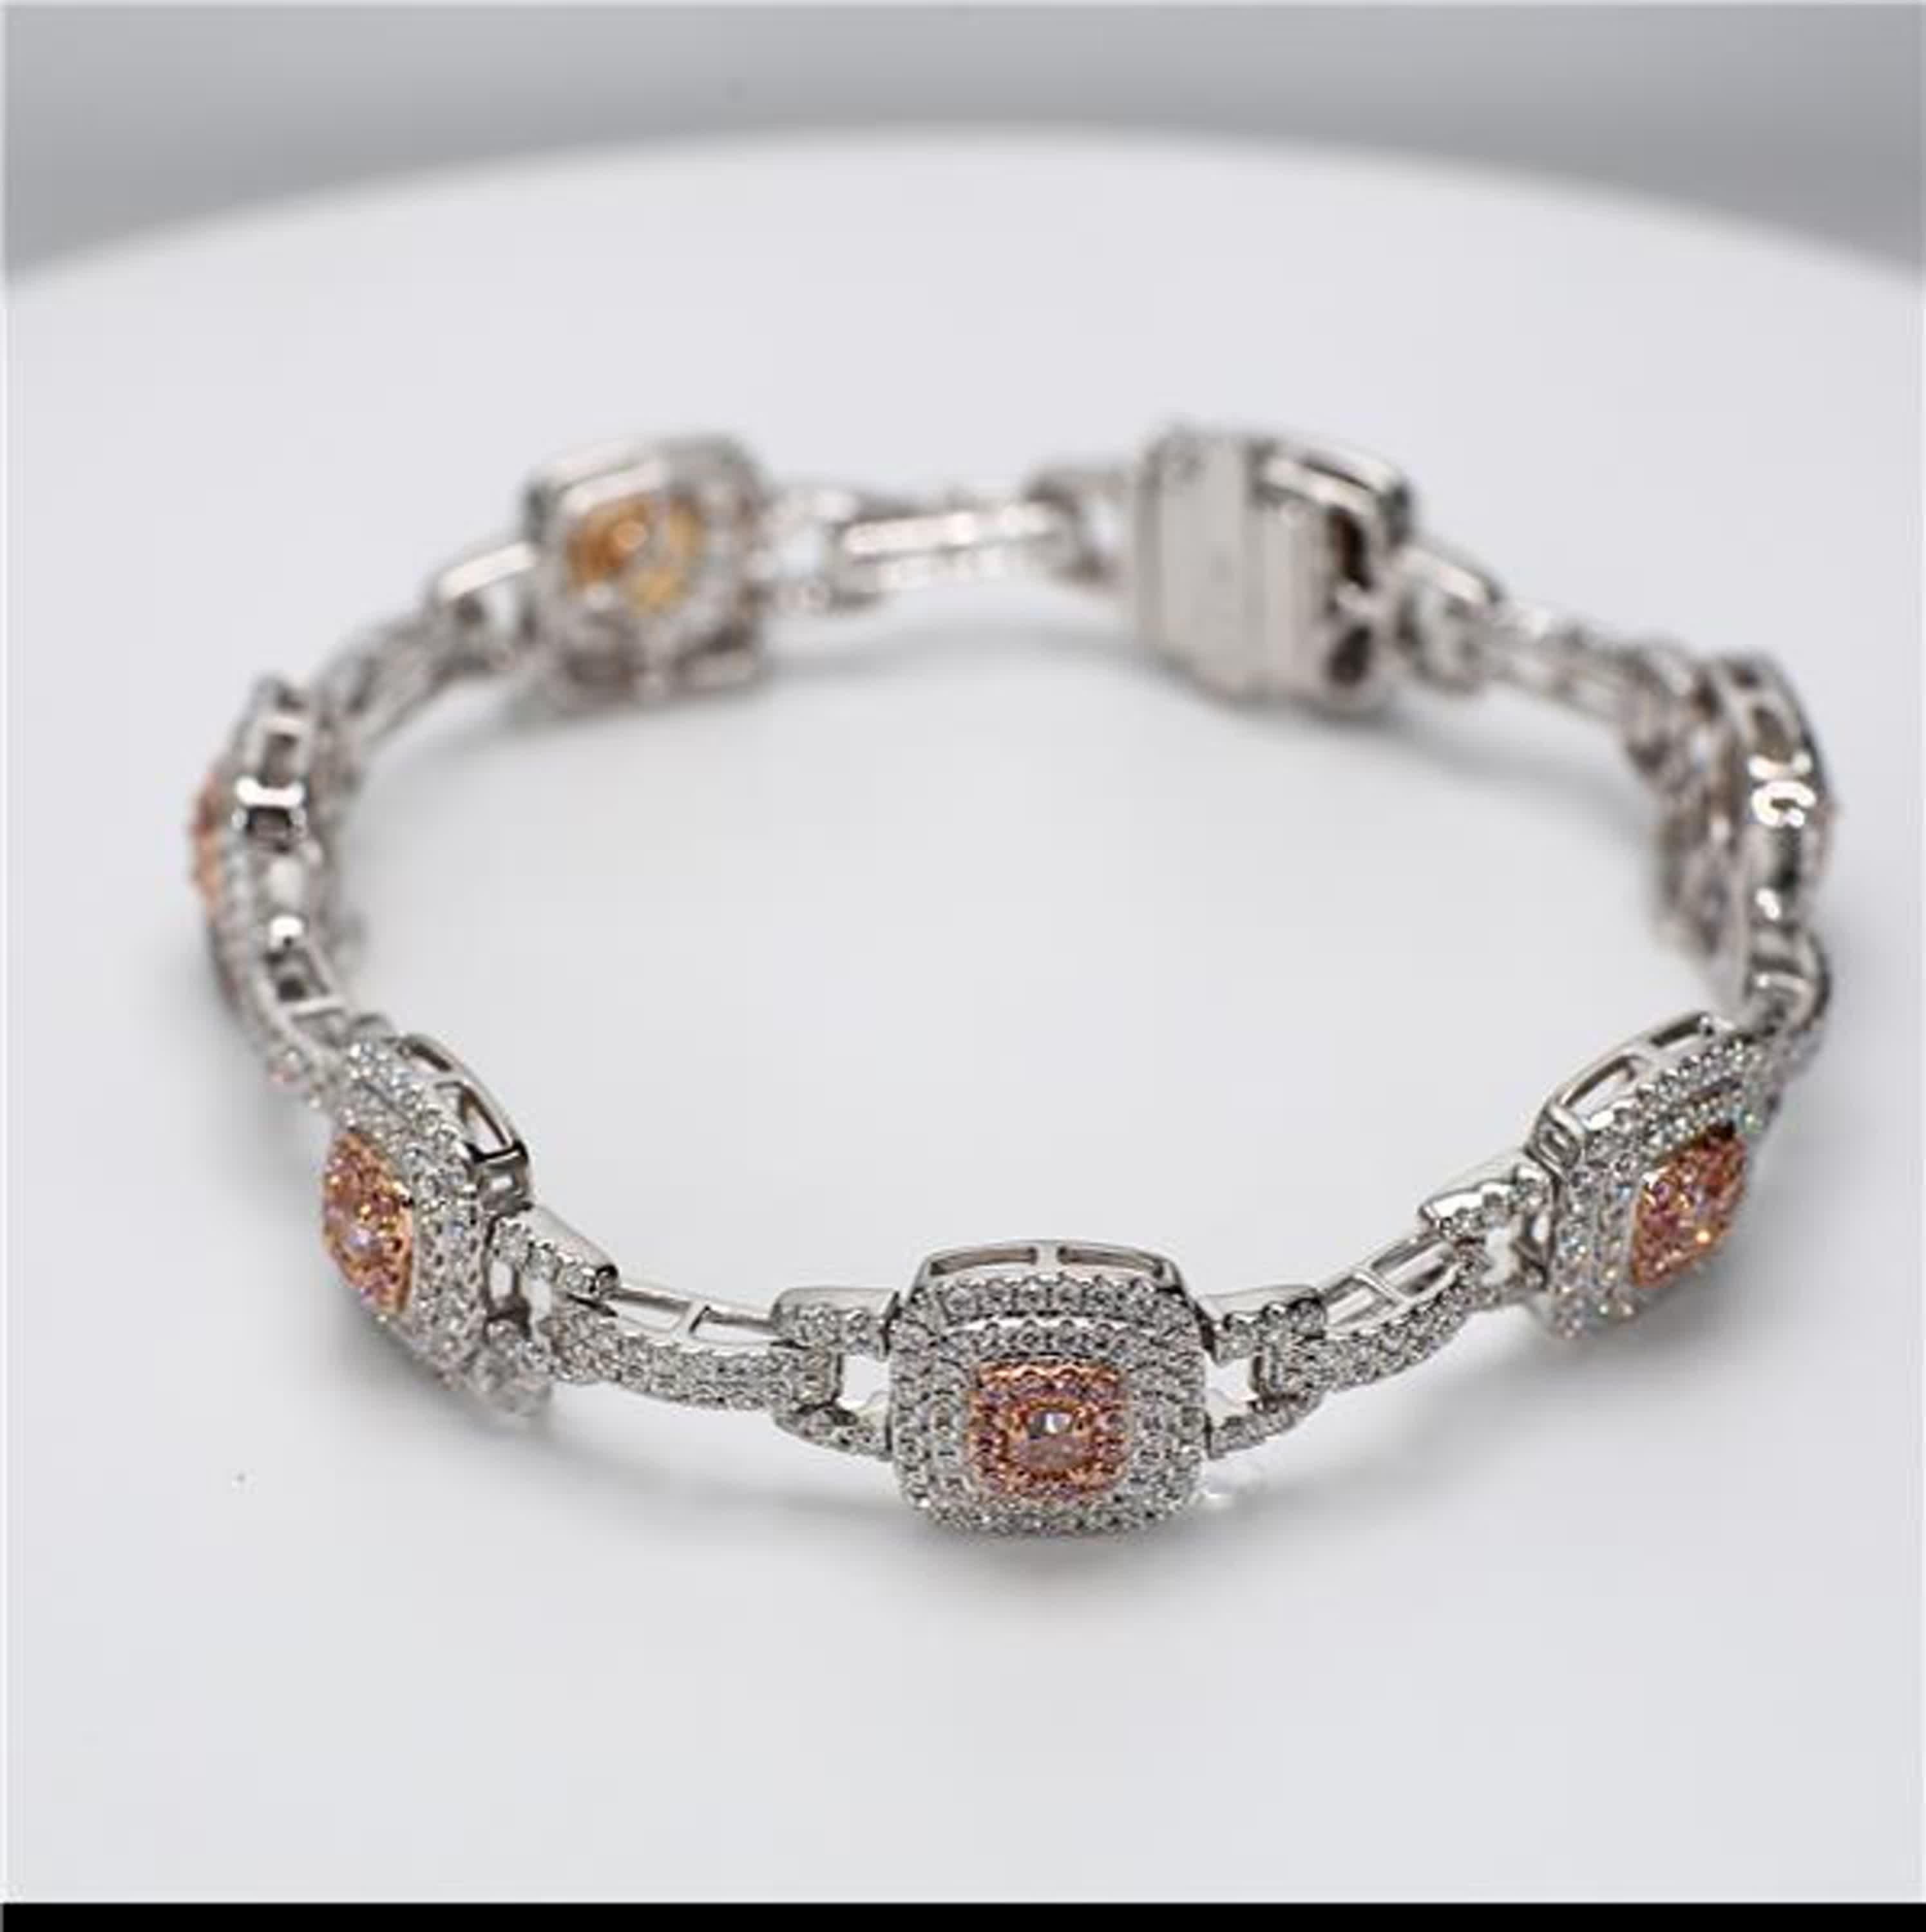 RareGemWorld's classic natural pink diamond bracelet. Mounted in a beautiful 18K Rose and White Gold setting with natural cushion cut pink diamonds and natural radiant cut pink diamonds. The pink diamonds are surrounded by small round natural white